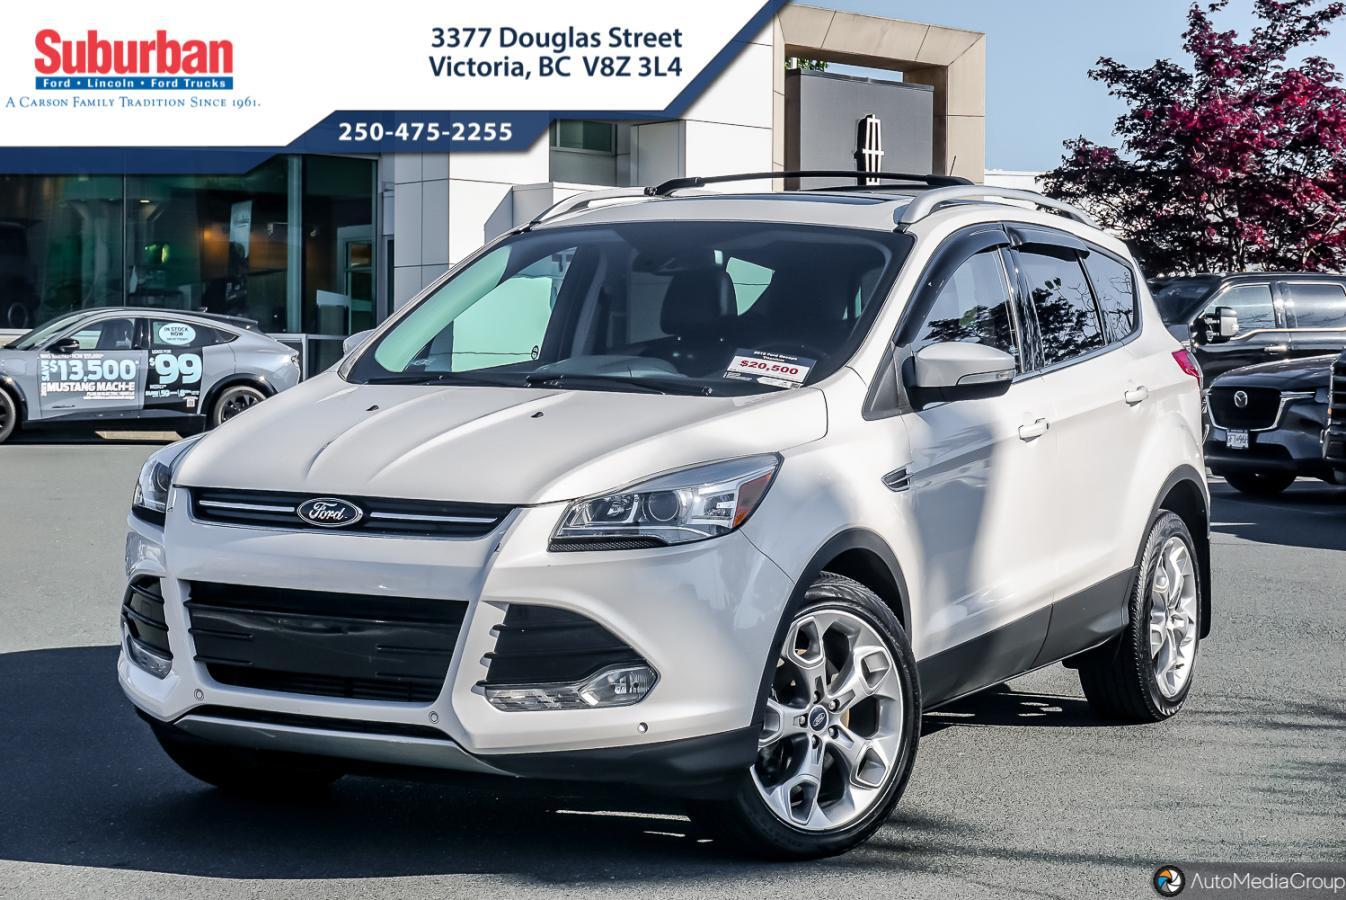 2016 Ford Escape Titanium 4WD | Panorama Roof | Trailer Tow